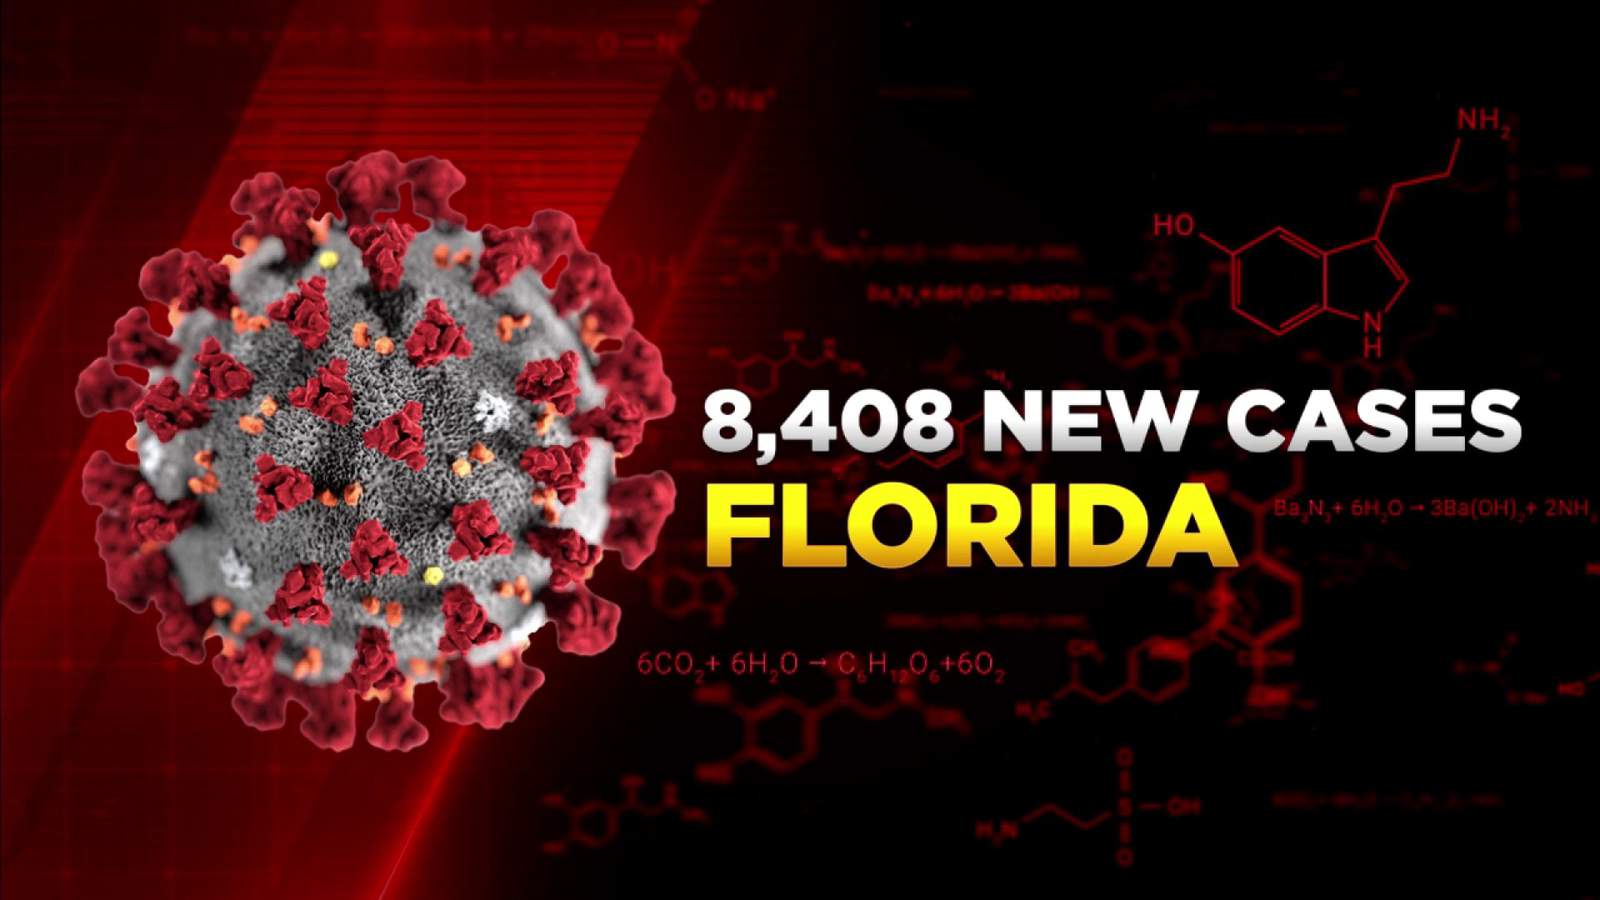 Florida reports 8,408 new cases of coronavirus, the fourth consecutive day below 10,000